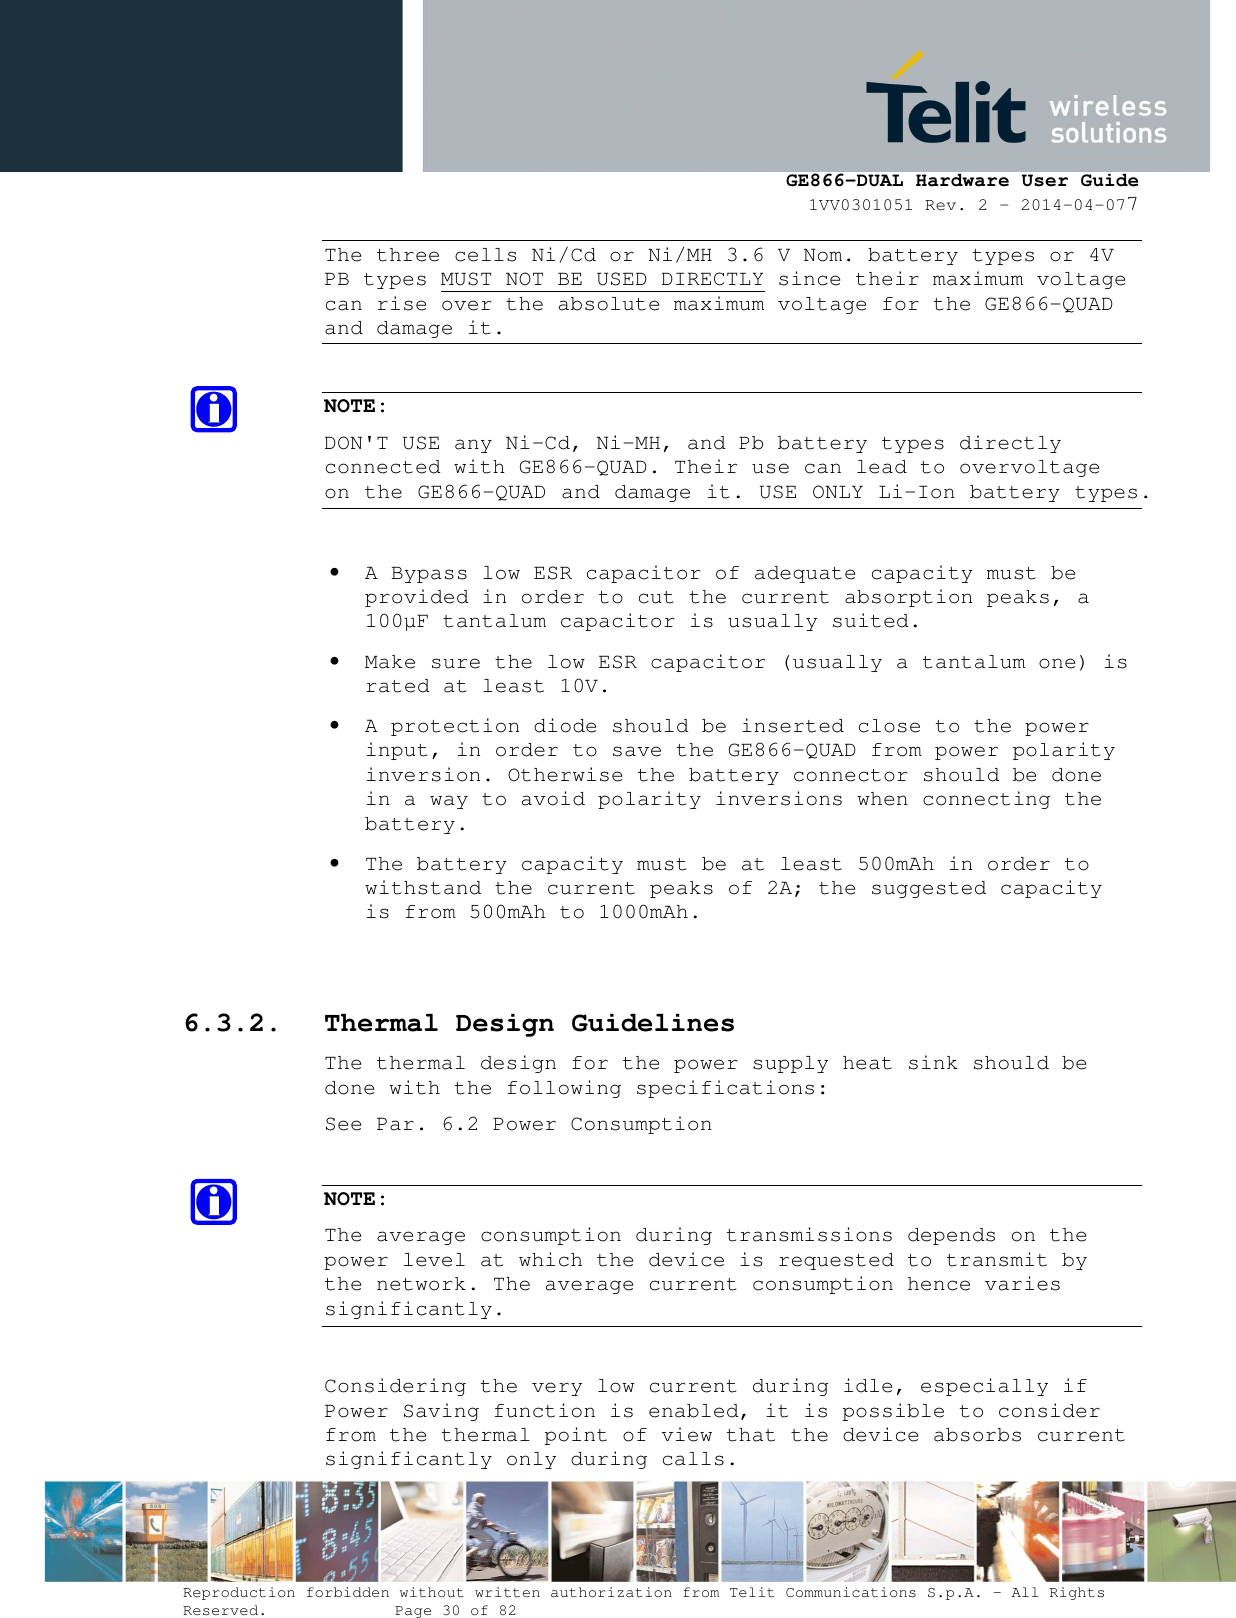      GE866-DUAL Hardware User Guide 1VV0301051 Rev. 2 – 2014-04-077  Reproduction forbidden without written authorization from Telit Communications S.p.A. - All Rights Reserved.    Page 30 of 82 Mod. 0805 2011-07 Rev.2 The three cells Ni/Cd or Ni/MH 3.6 V Nom. battery types or 4V PB types MUST NOT BE USED DIRECTLY since their maximum voltage can rise over the absolute maximum voltage for the GE866-QUAD and damage it.  NOTE: DON&apos;T USE any Ni-Cd, Ni-MH, and Pb battery types directly connected with GE866-QUAD. Their use can lead to overvoltage on the GE866-QUAD and damage it. USE ONLY Li-Ion battery types.  • A Bypass low ESR capacitor of adequate capacity must be provided in order to cut the current absorption peaks, a 100µF tantalum capacitor is usually suited. • Make sure the low ESR capacitor (usually a tantalum one) is rated at least 10V. • A protection diode should be inserted close to the power input, in order to save the GE866-QUAD from power polarity inversion. Otherwise the battery connector should be done in a way to avoid polarity inversions when connecting the battery. • The battery capacity must be at least 500mAh in order to withstand the current peaks of 2A; the suggested capacity is from 500mAh to 1000mAh.  6.3.2. Thermal Design Guidelines The thermal design for the power supply heat sink should be done with the following specifications: See Par. 6.2 Power Consumption  NOTE: The average consumption during transmissions depends on the power level at which the device is requested to transmit by the network. The average current consumption hence varies significantly.  Considering the very low current during idle, especially if Power Saving function is enabled, it is possible to consider from the thermal point of view that the device absorbs current significantly only during calls.  